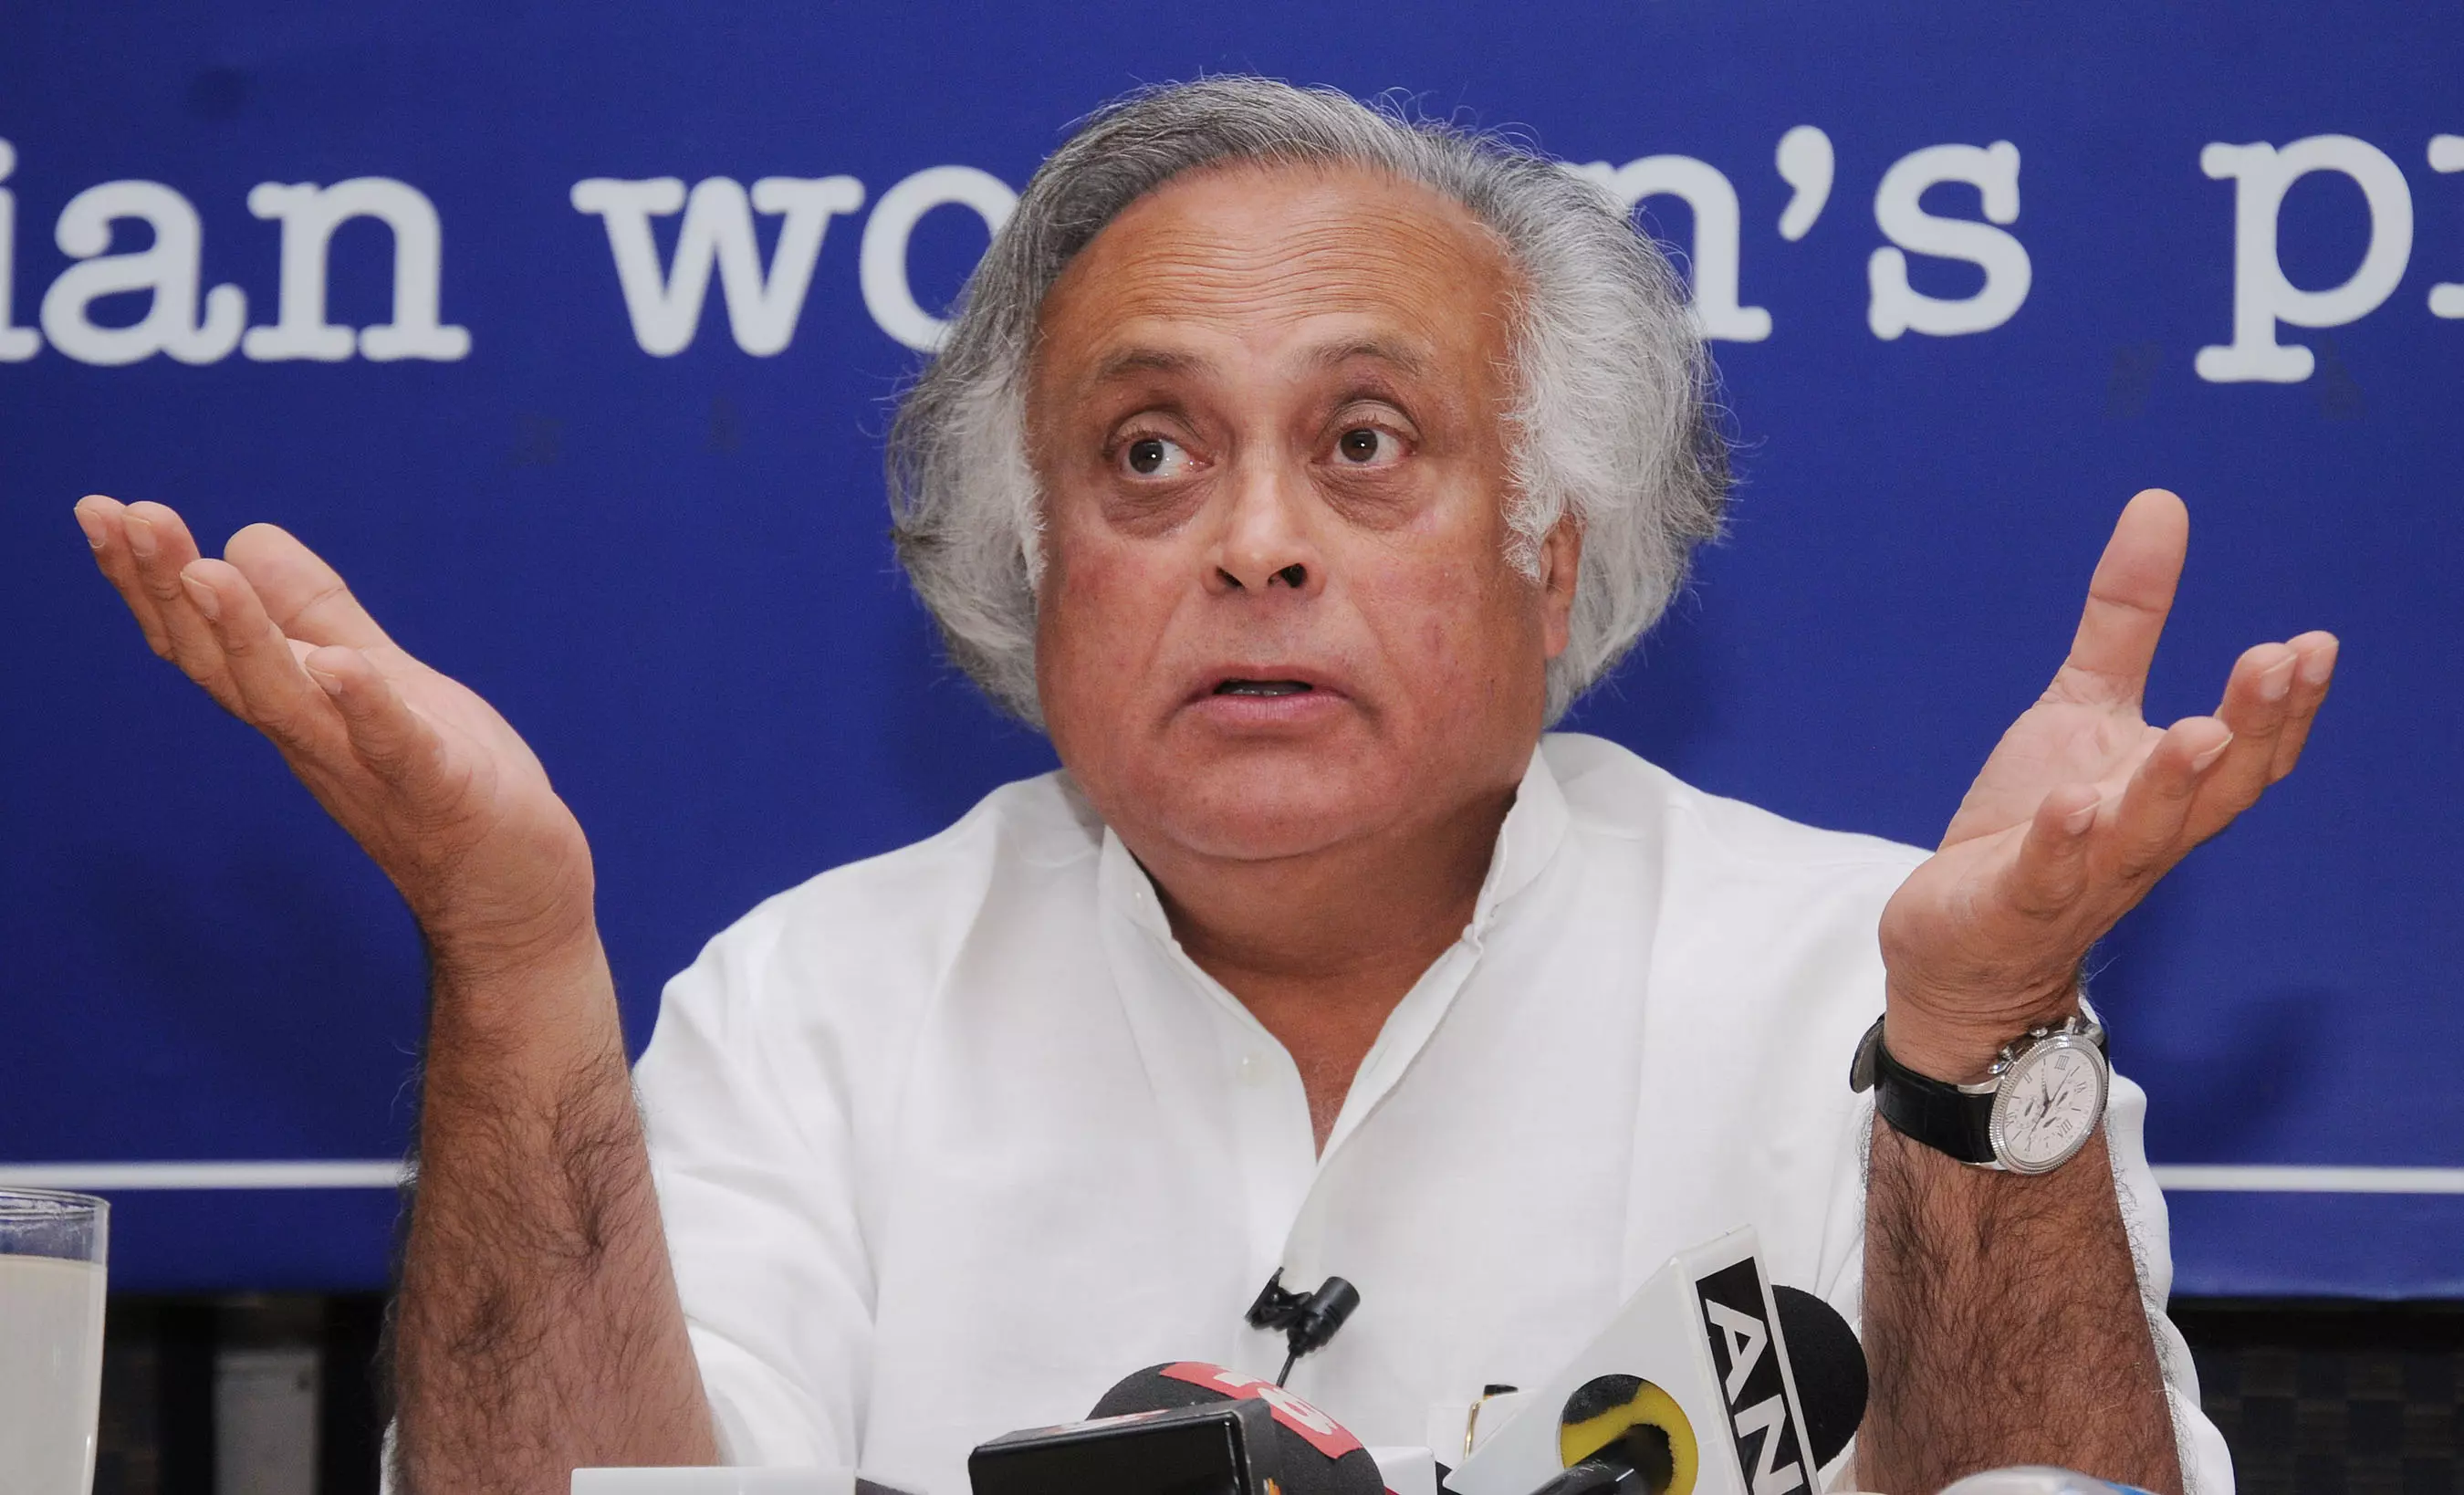 Pandemic lockdown was delayed to bring down Cong govt in MP in 2020: Jairam Ramesh